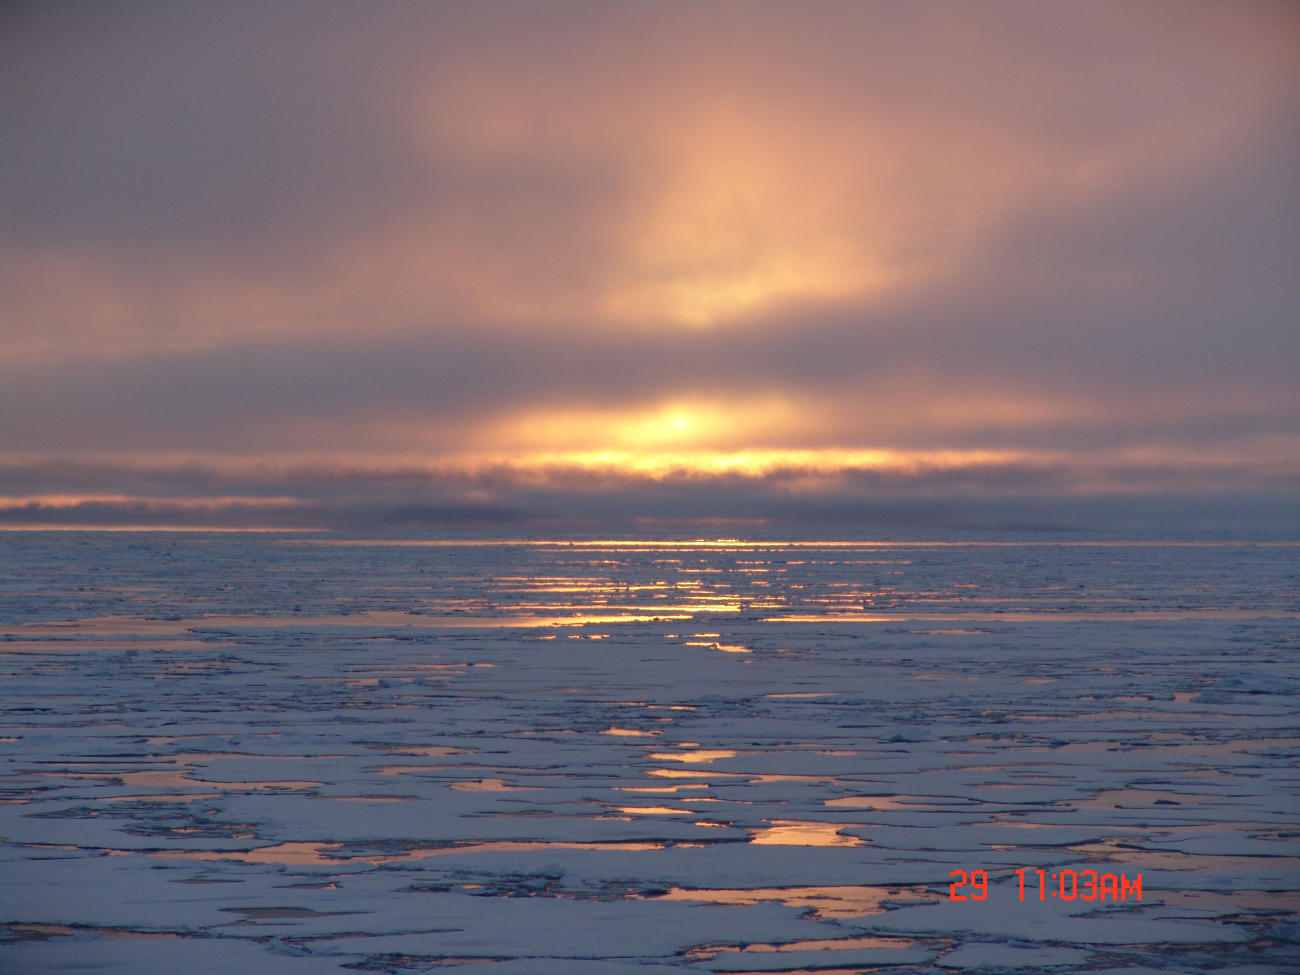 The golden Arctic with sun reflecting off what appears to be a field of firstyear ice floes